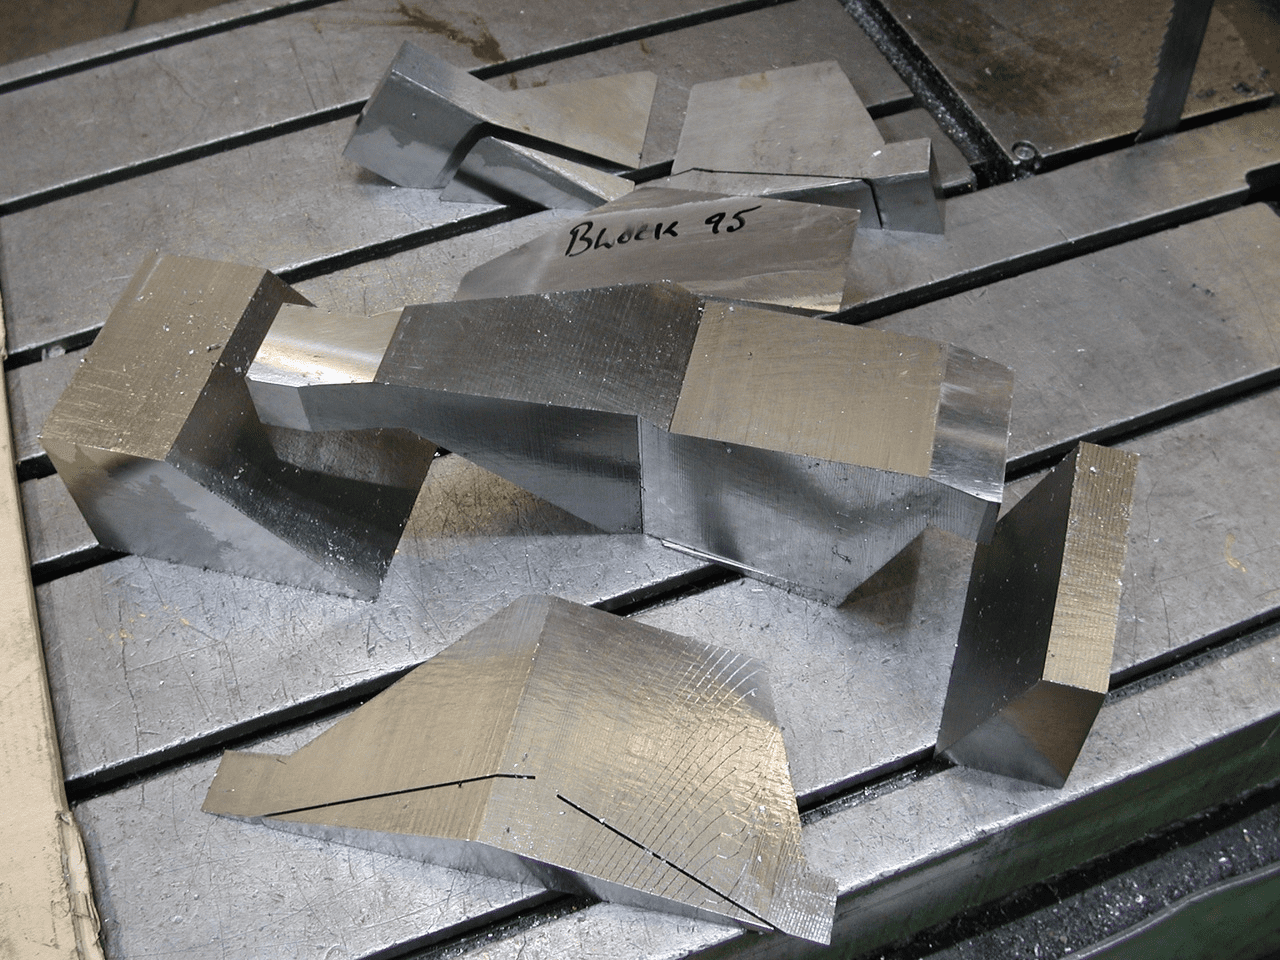 Subcontract Cutting Services For Metals And Non-Metals